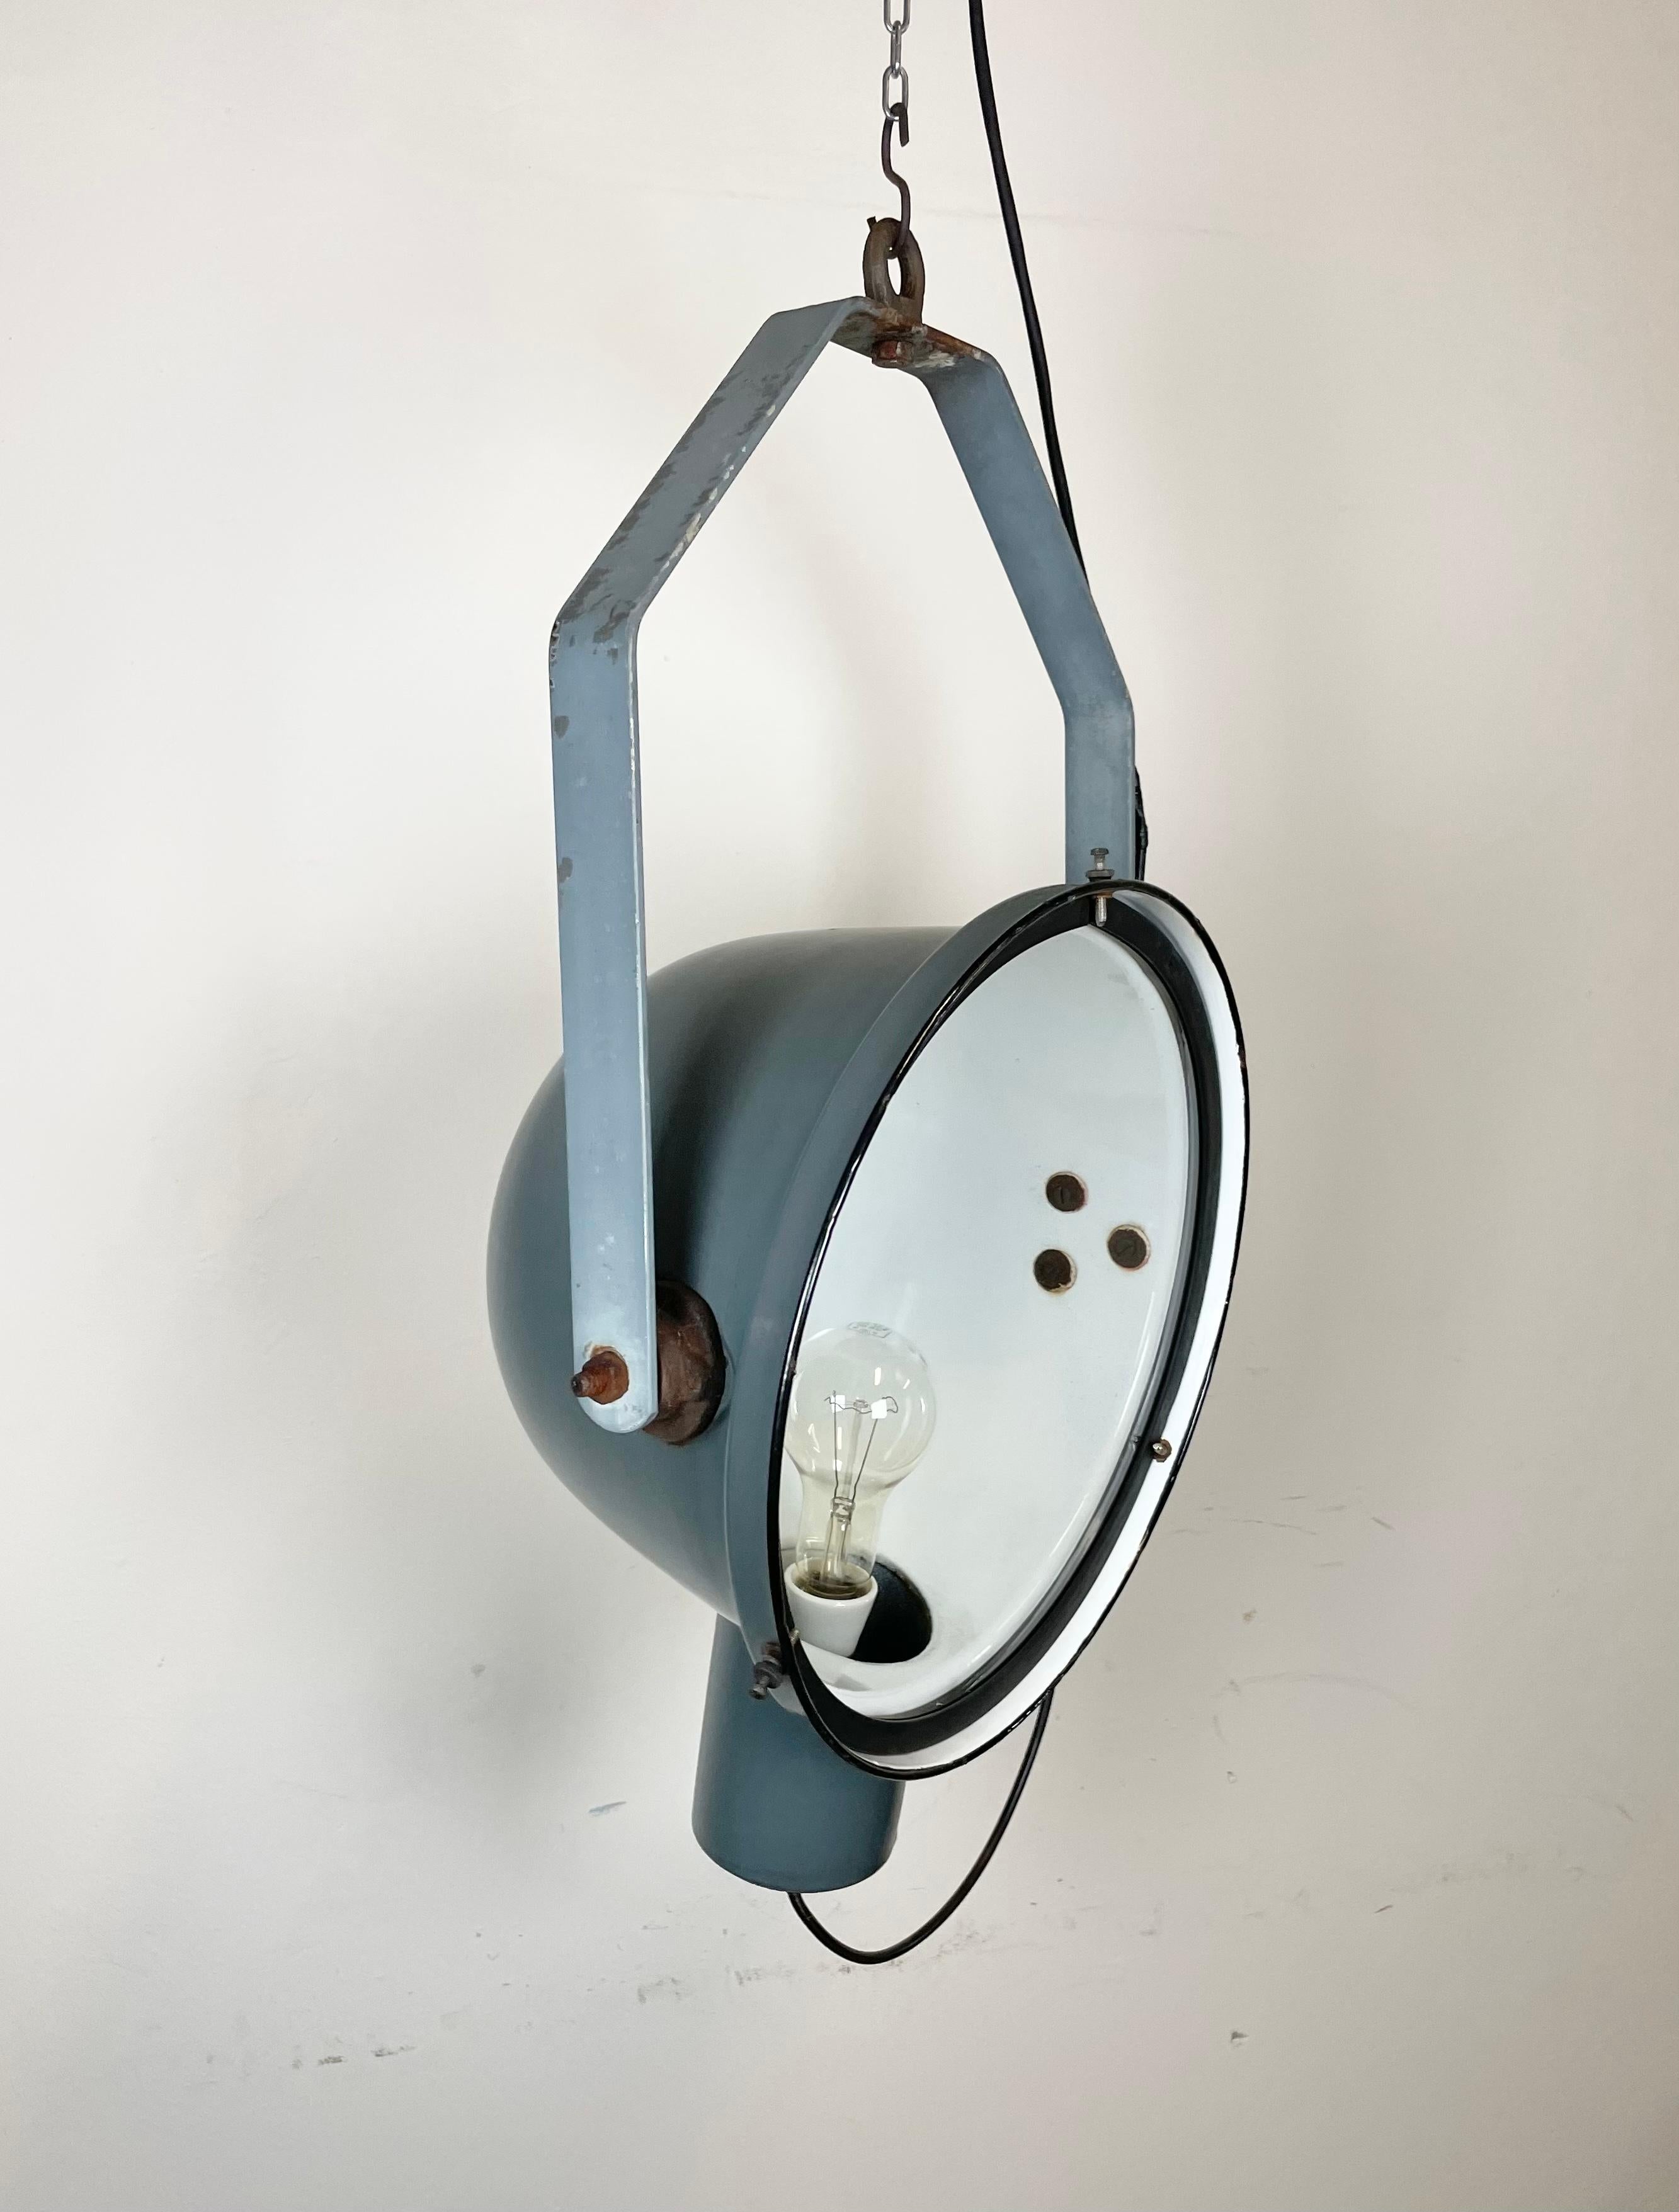 Czech Industrial Grey Enamel Factory Spotlight with Glass Cover, 1950s For Sale